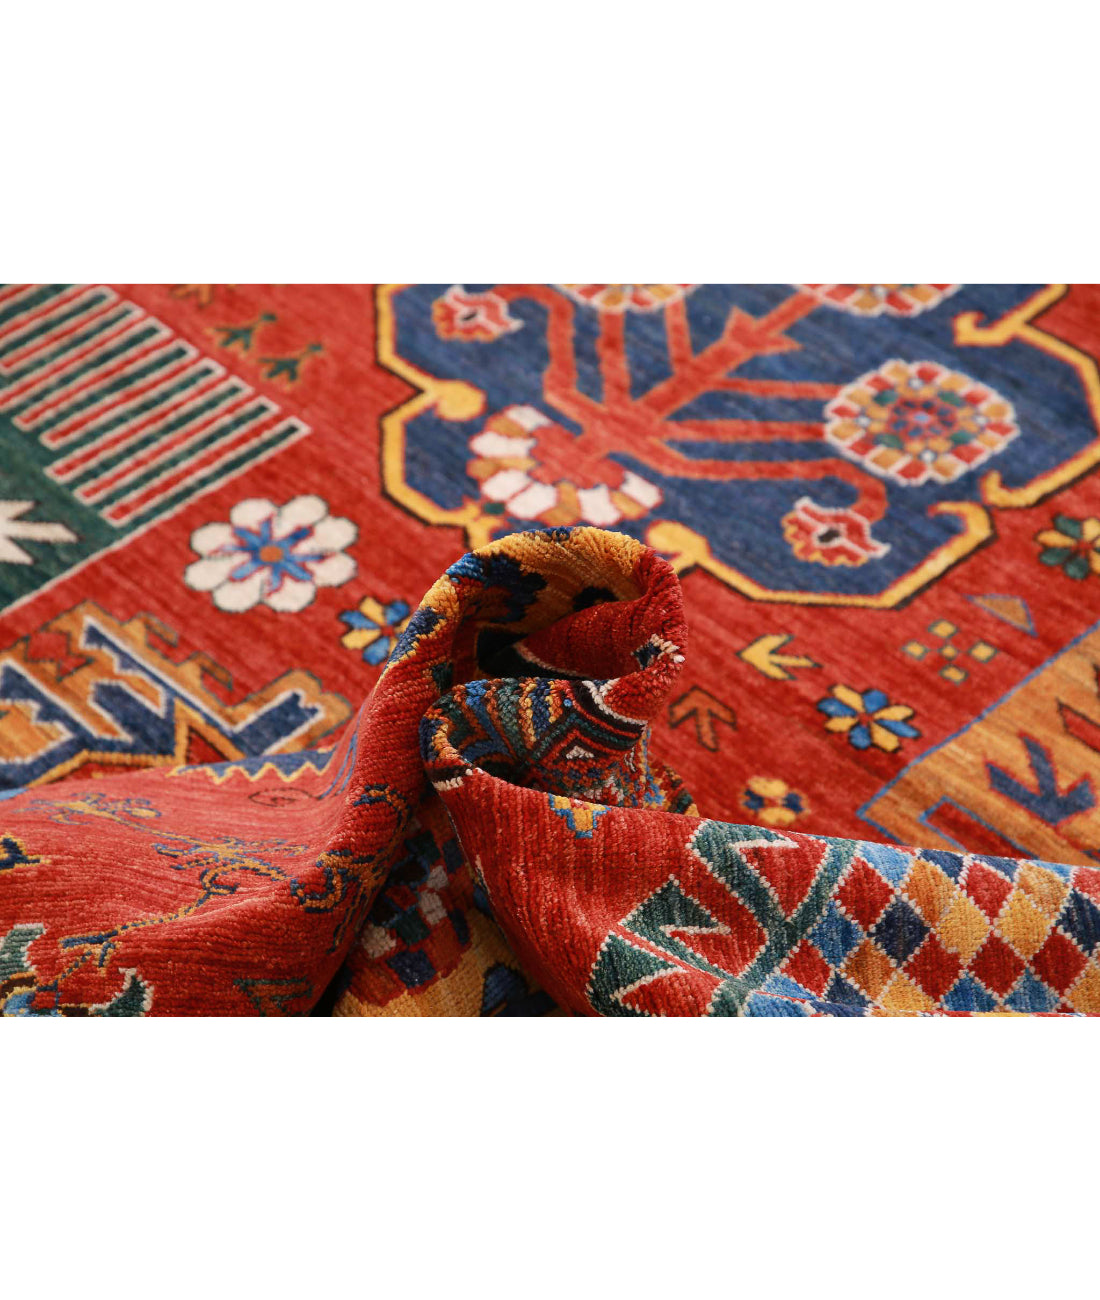 Hand Knotted Nomadic Caucasian Humna Wool Rug - 13'6'' x 16'3'' 13'6'' x 16'3'' (405 X 488) / Red / Red